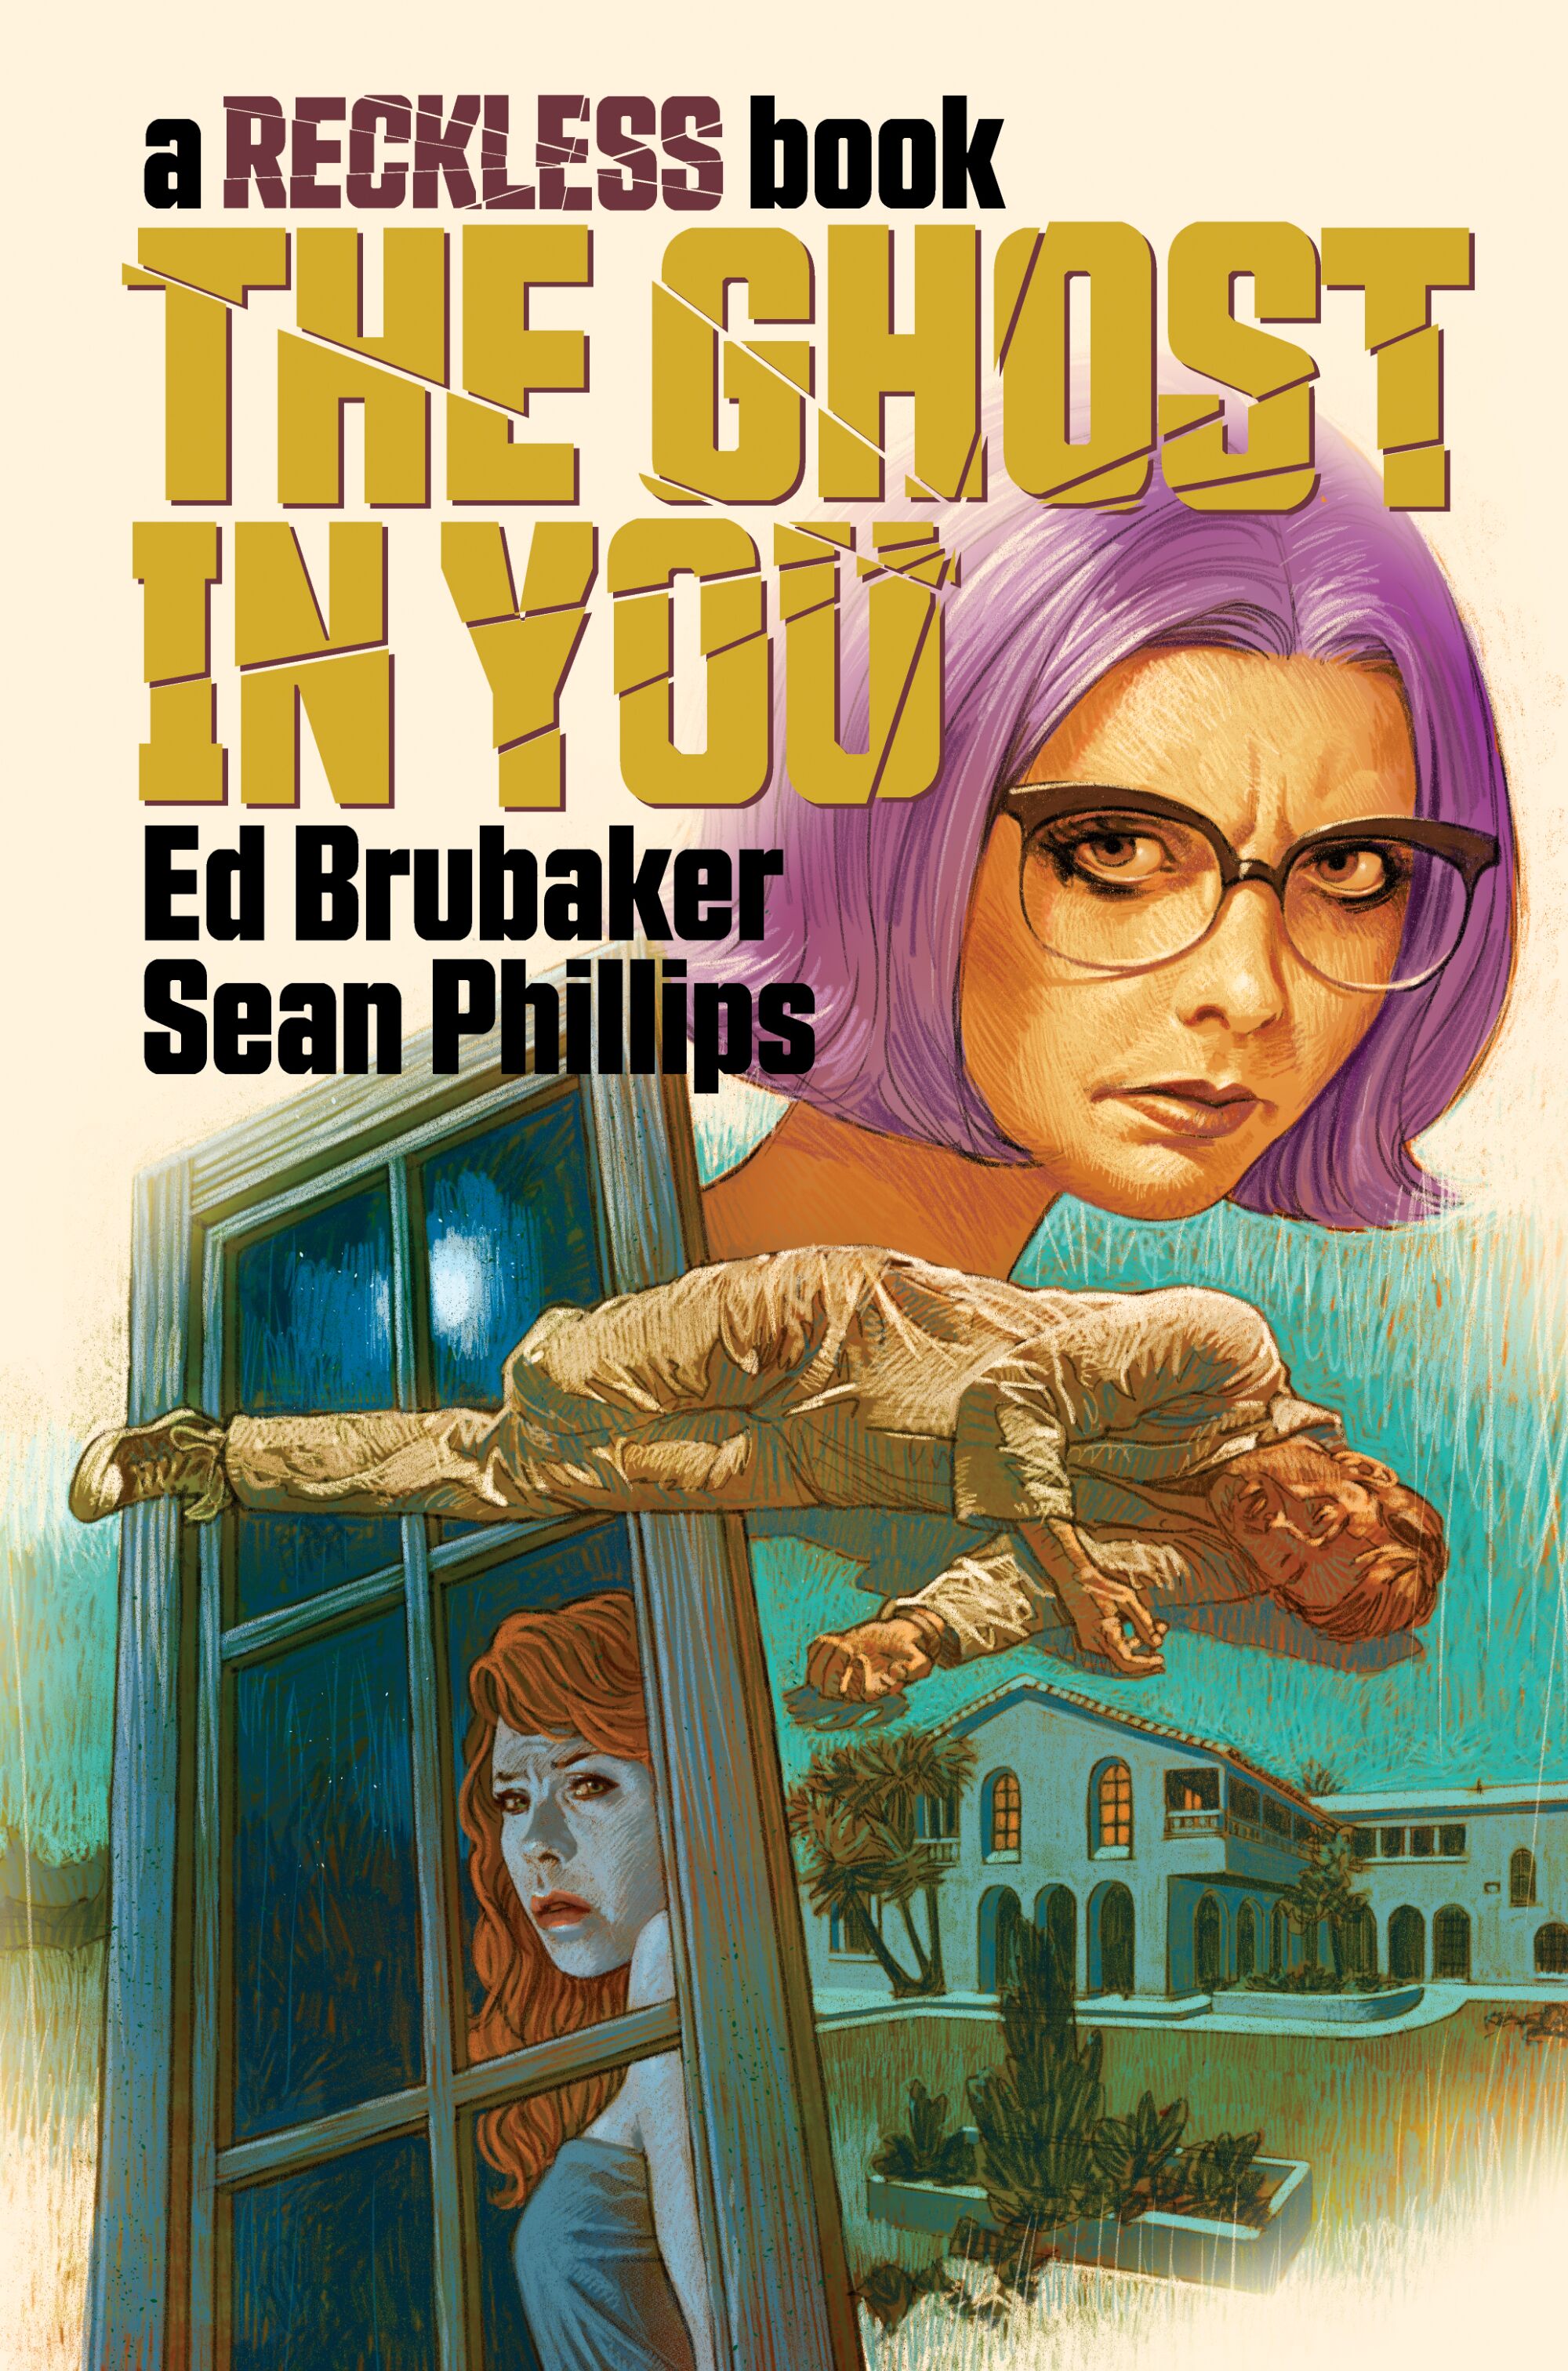 "The Ghost in You" by Ed Brubaker and Sean Phillips